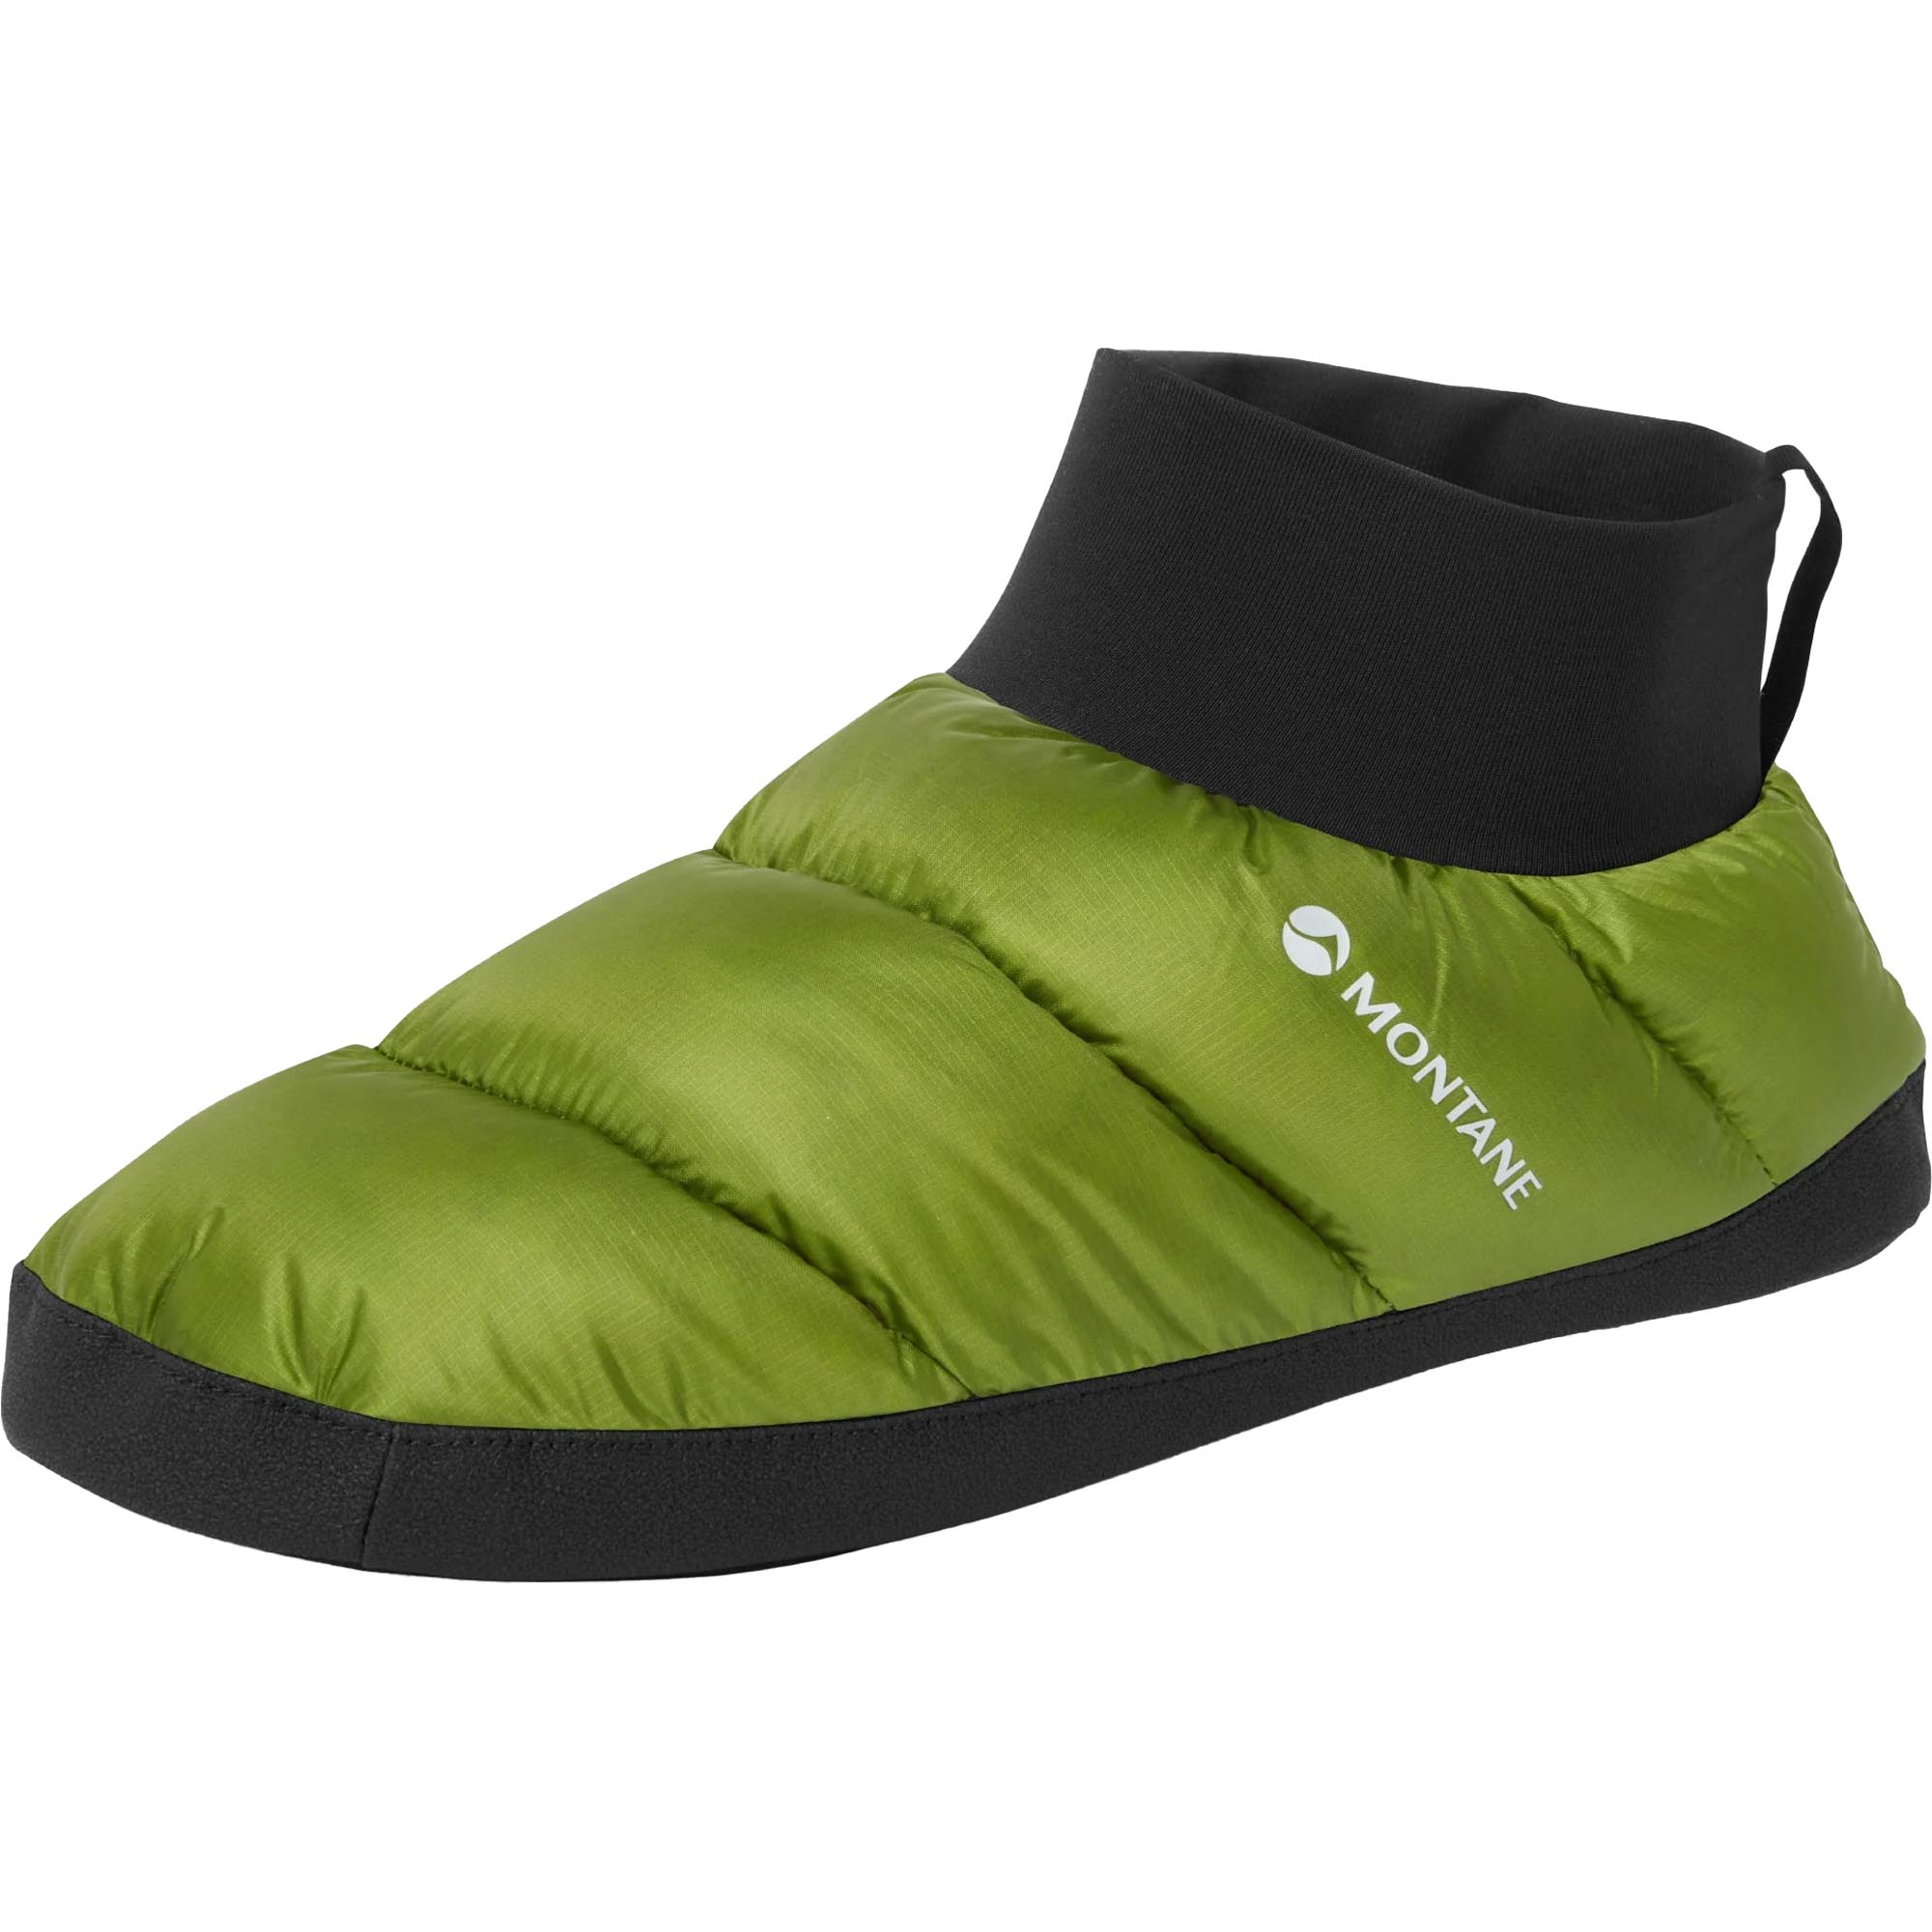 Montane Anti-Freeze Insulated Camping Slippers